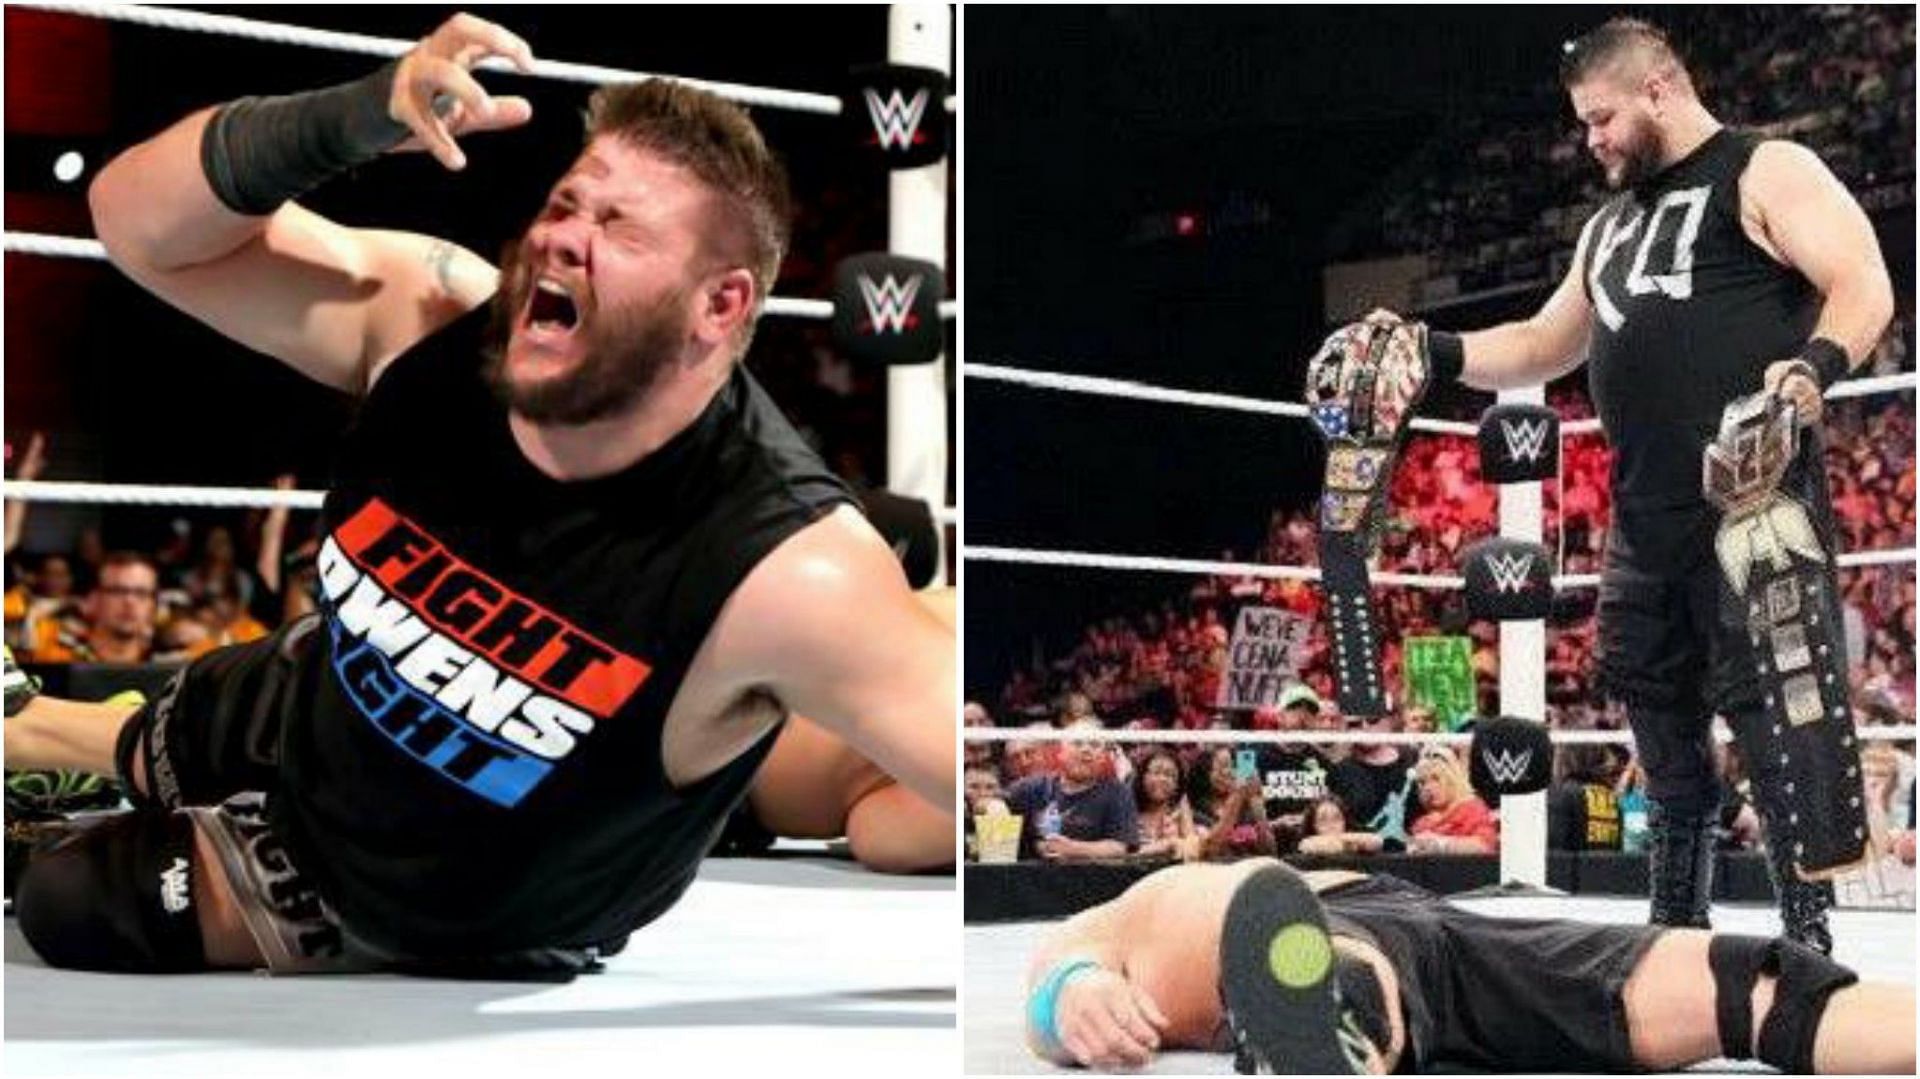 Kevin Owens&#039; main roster debut presented him as a major and dangerous WWE superstar.